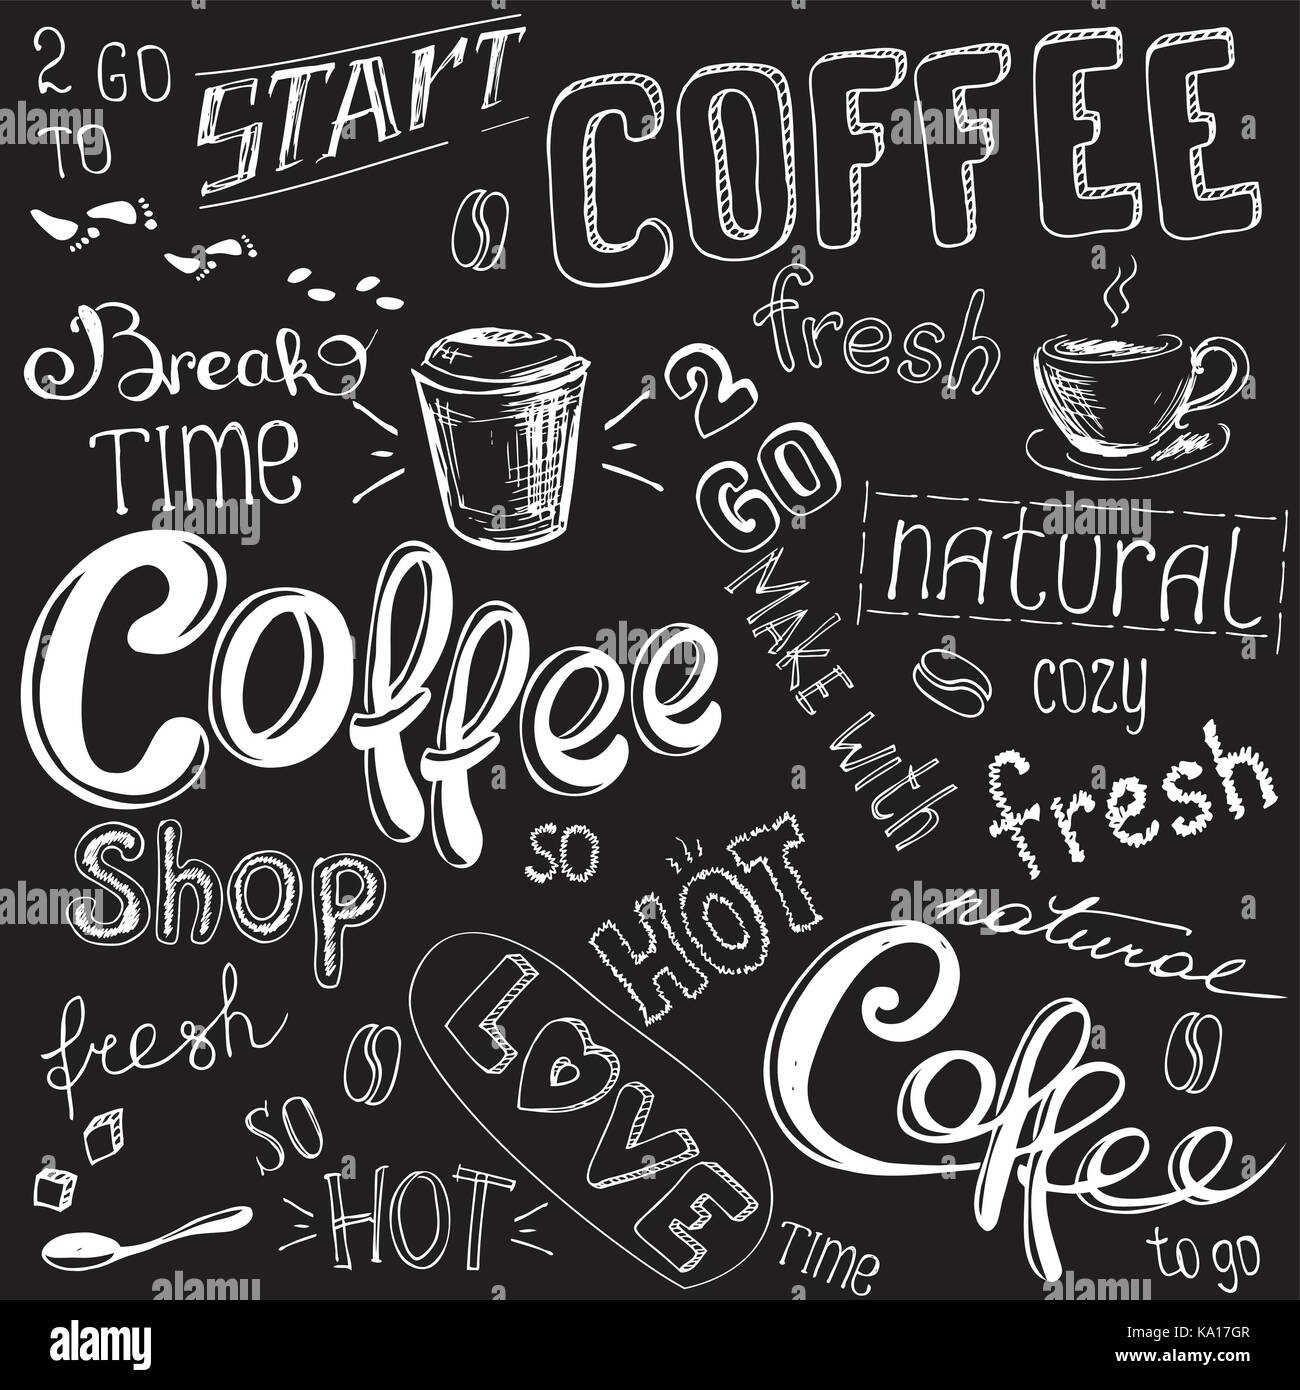 Coffee doodle background, hand drawn on black,vector illustration Stock Vector